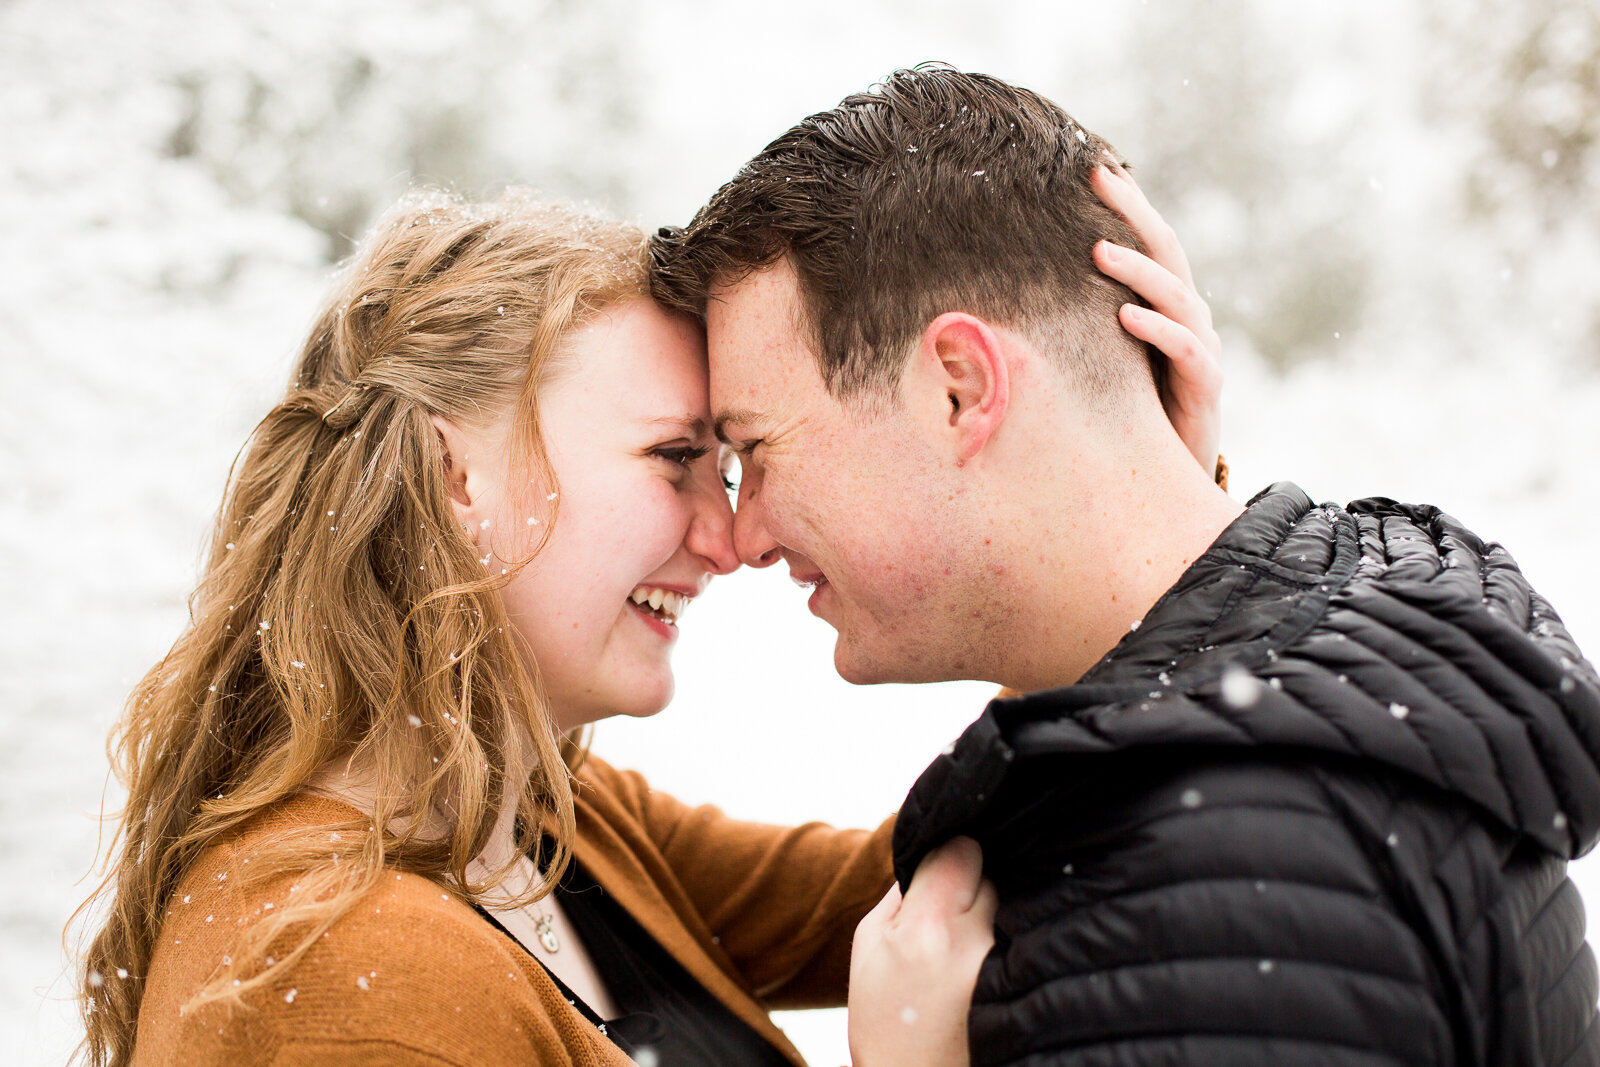 These photos were taken in the winter when Utah Wedding Photographer Robin Kunzler and her friend swapped photos!